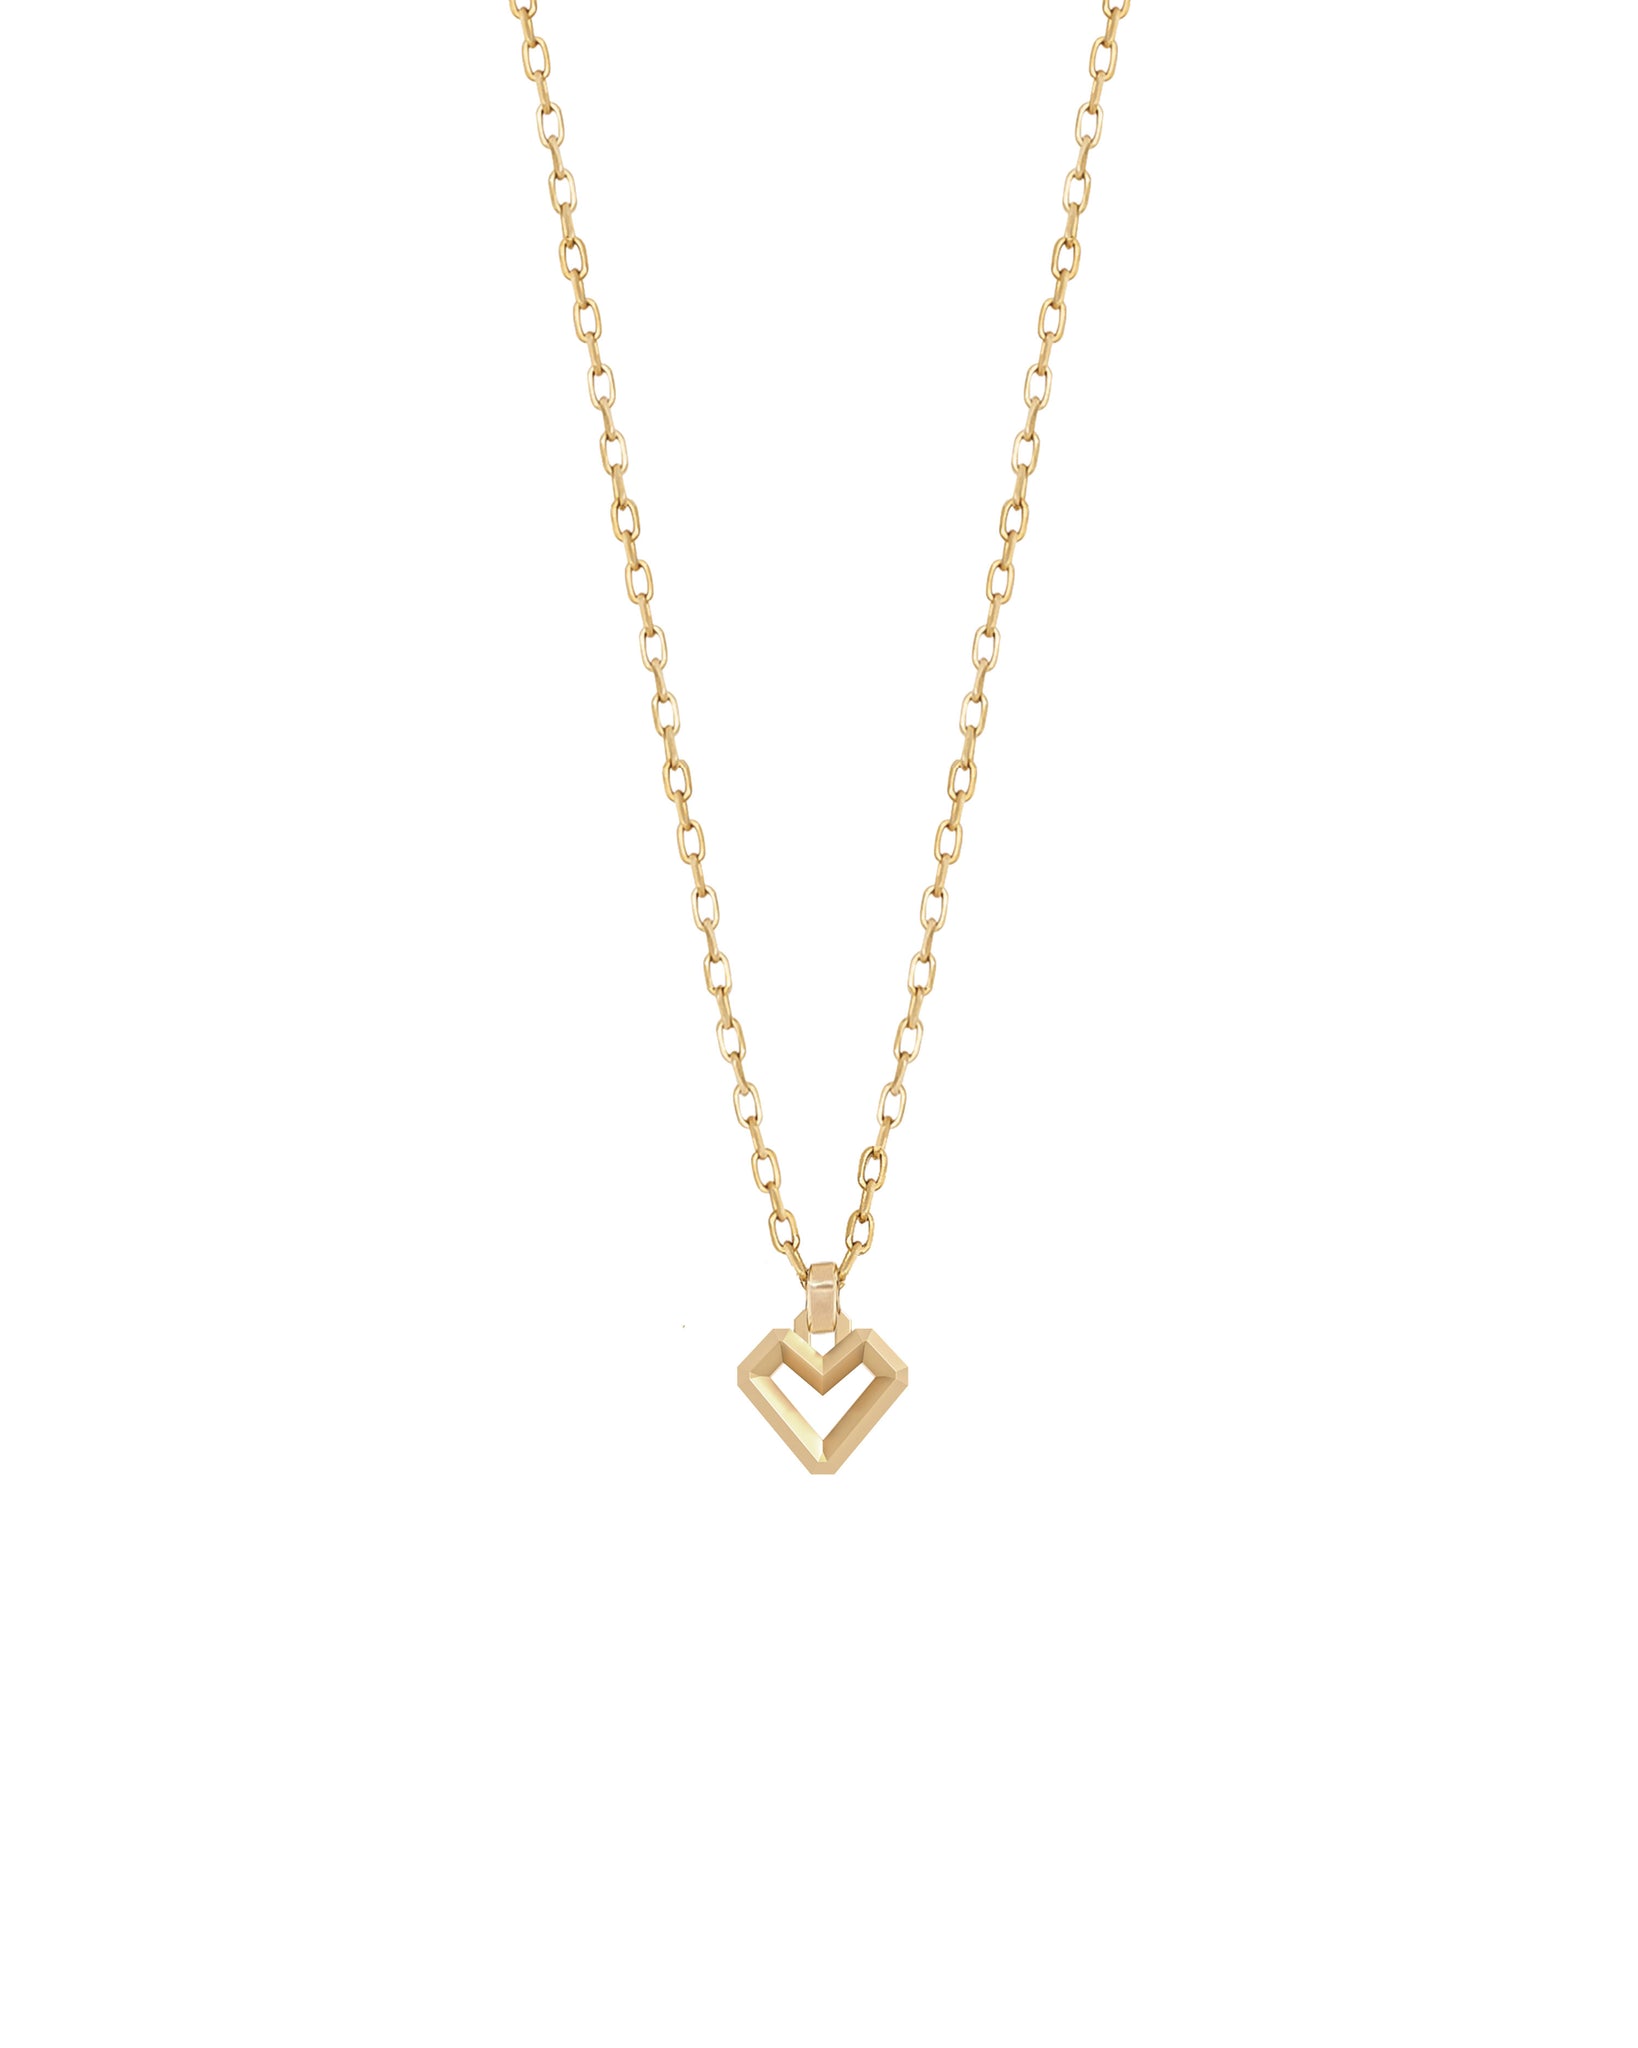 14K Gold Heart Charm Necklace